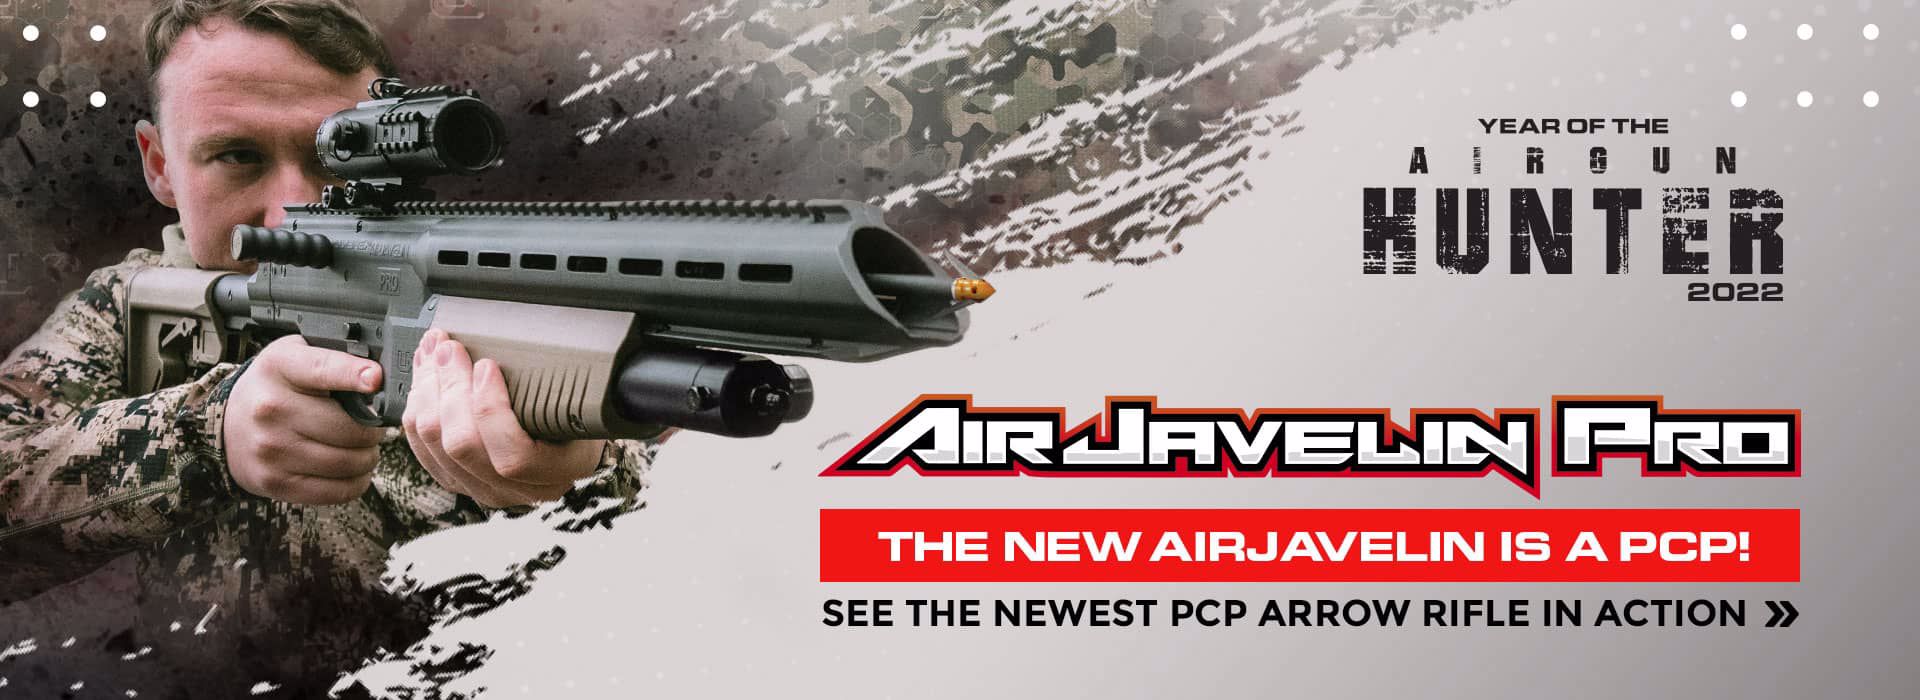 Year of the Airgun Hunter: The Umarex AirJavelin Pro. The New AirJavelin is a PCP. See the Newest PCP Arrow Rifle in Action!